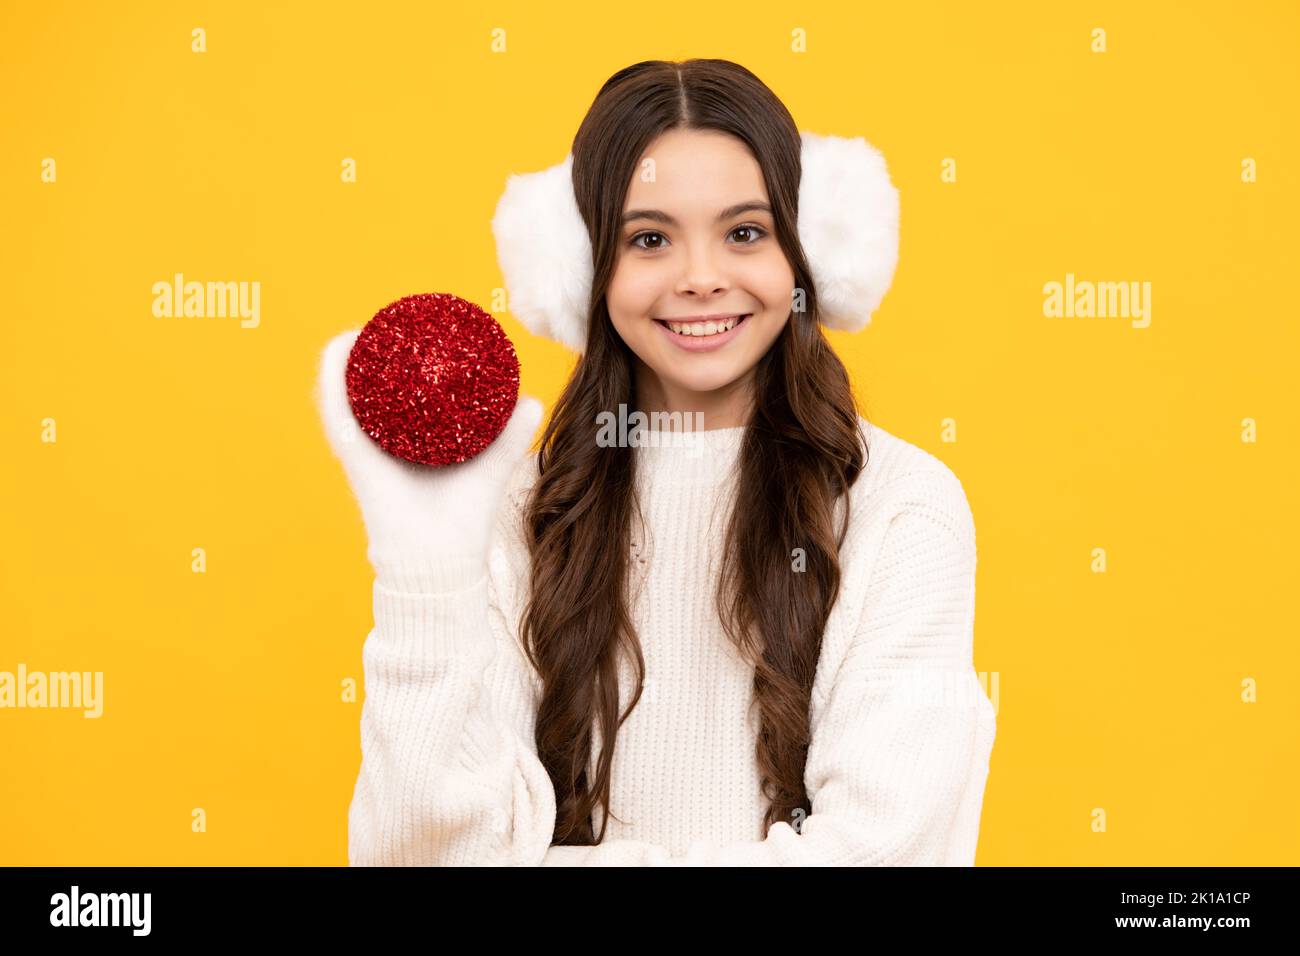 Teenager child santa girl in fur sweater, christmas ball isolated on yellow background. Happy New Year, celebration holiday concept. Stock Photo